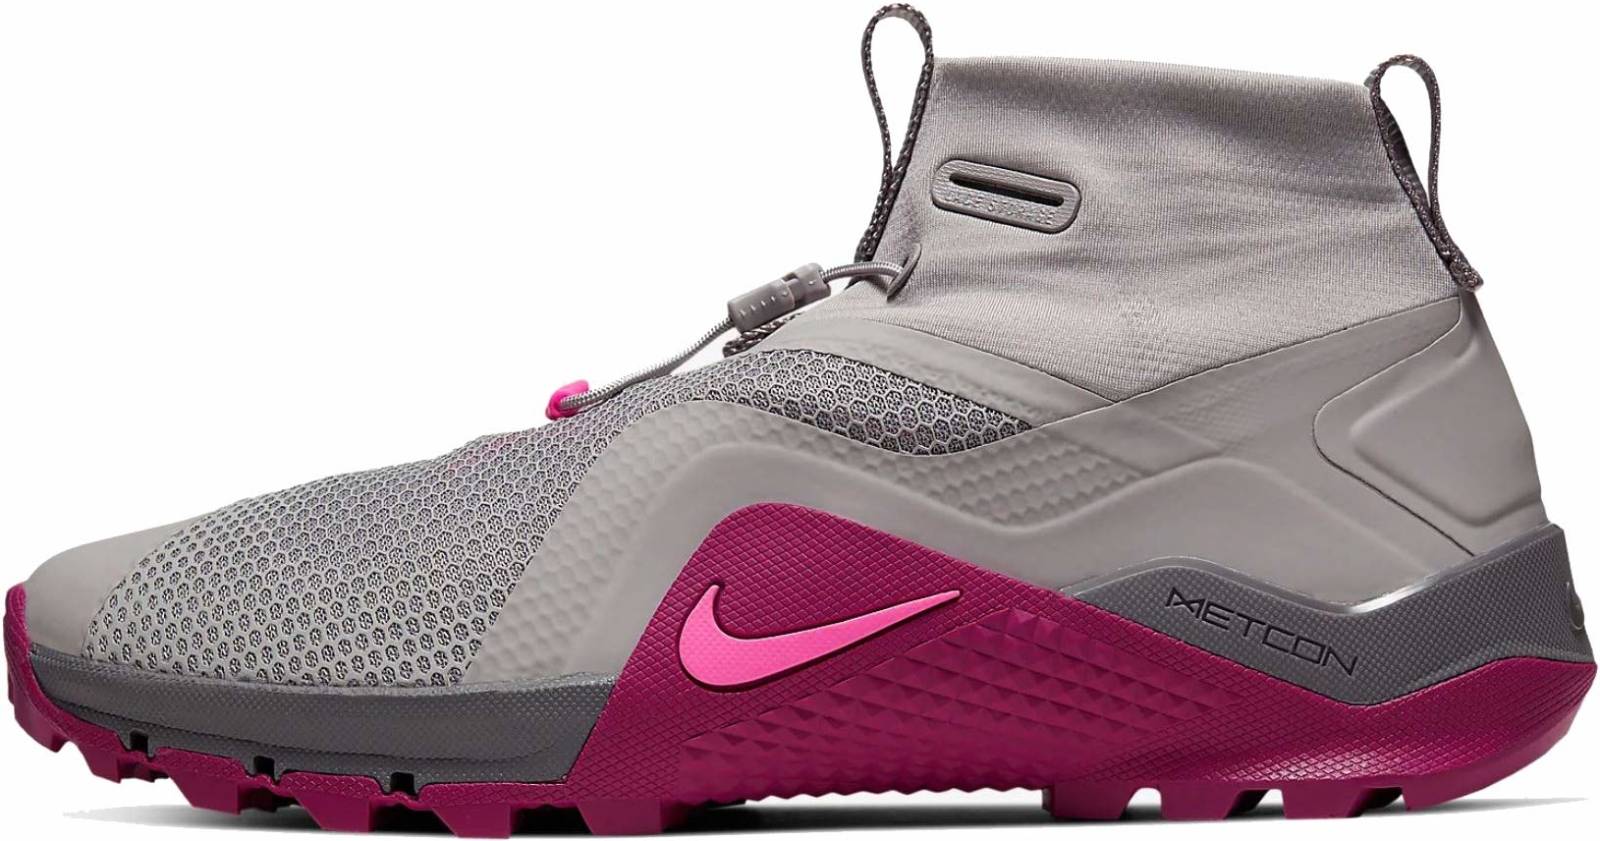 Only £79 + Review of Nike Metcon SF 